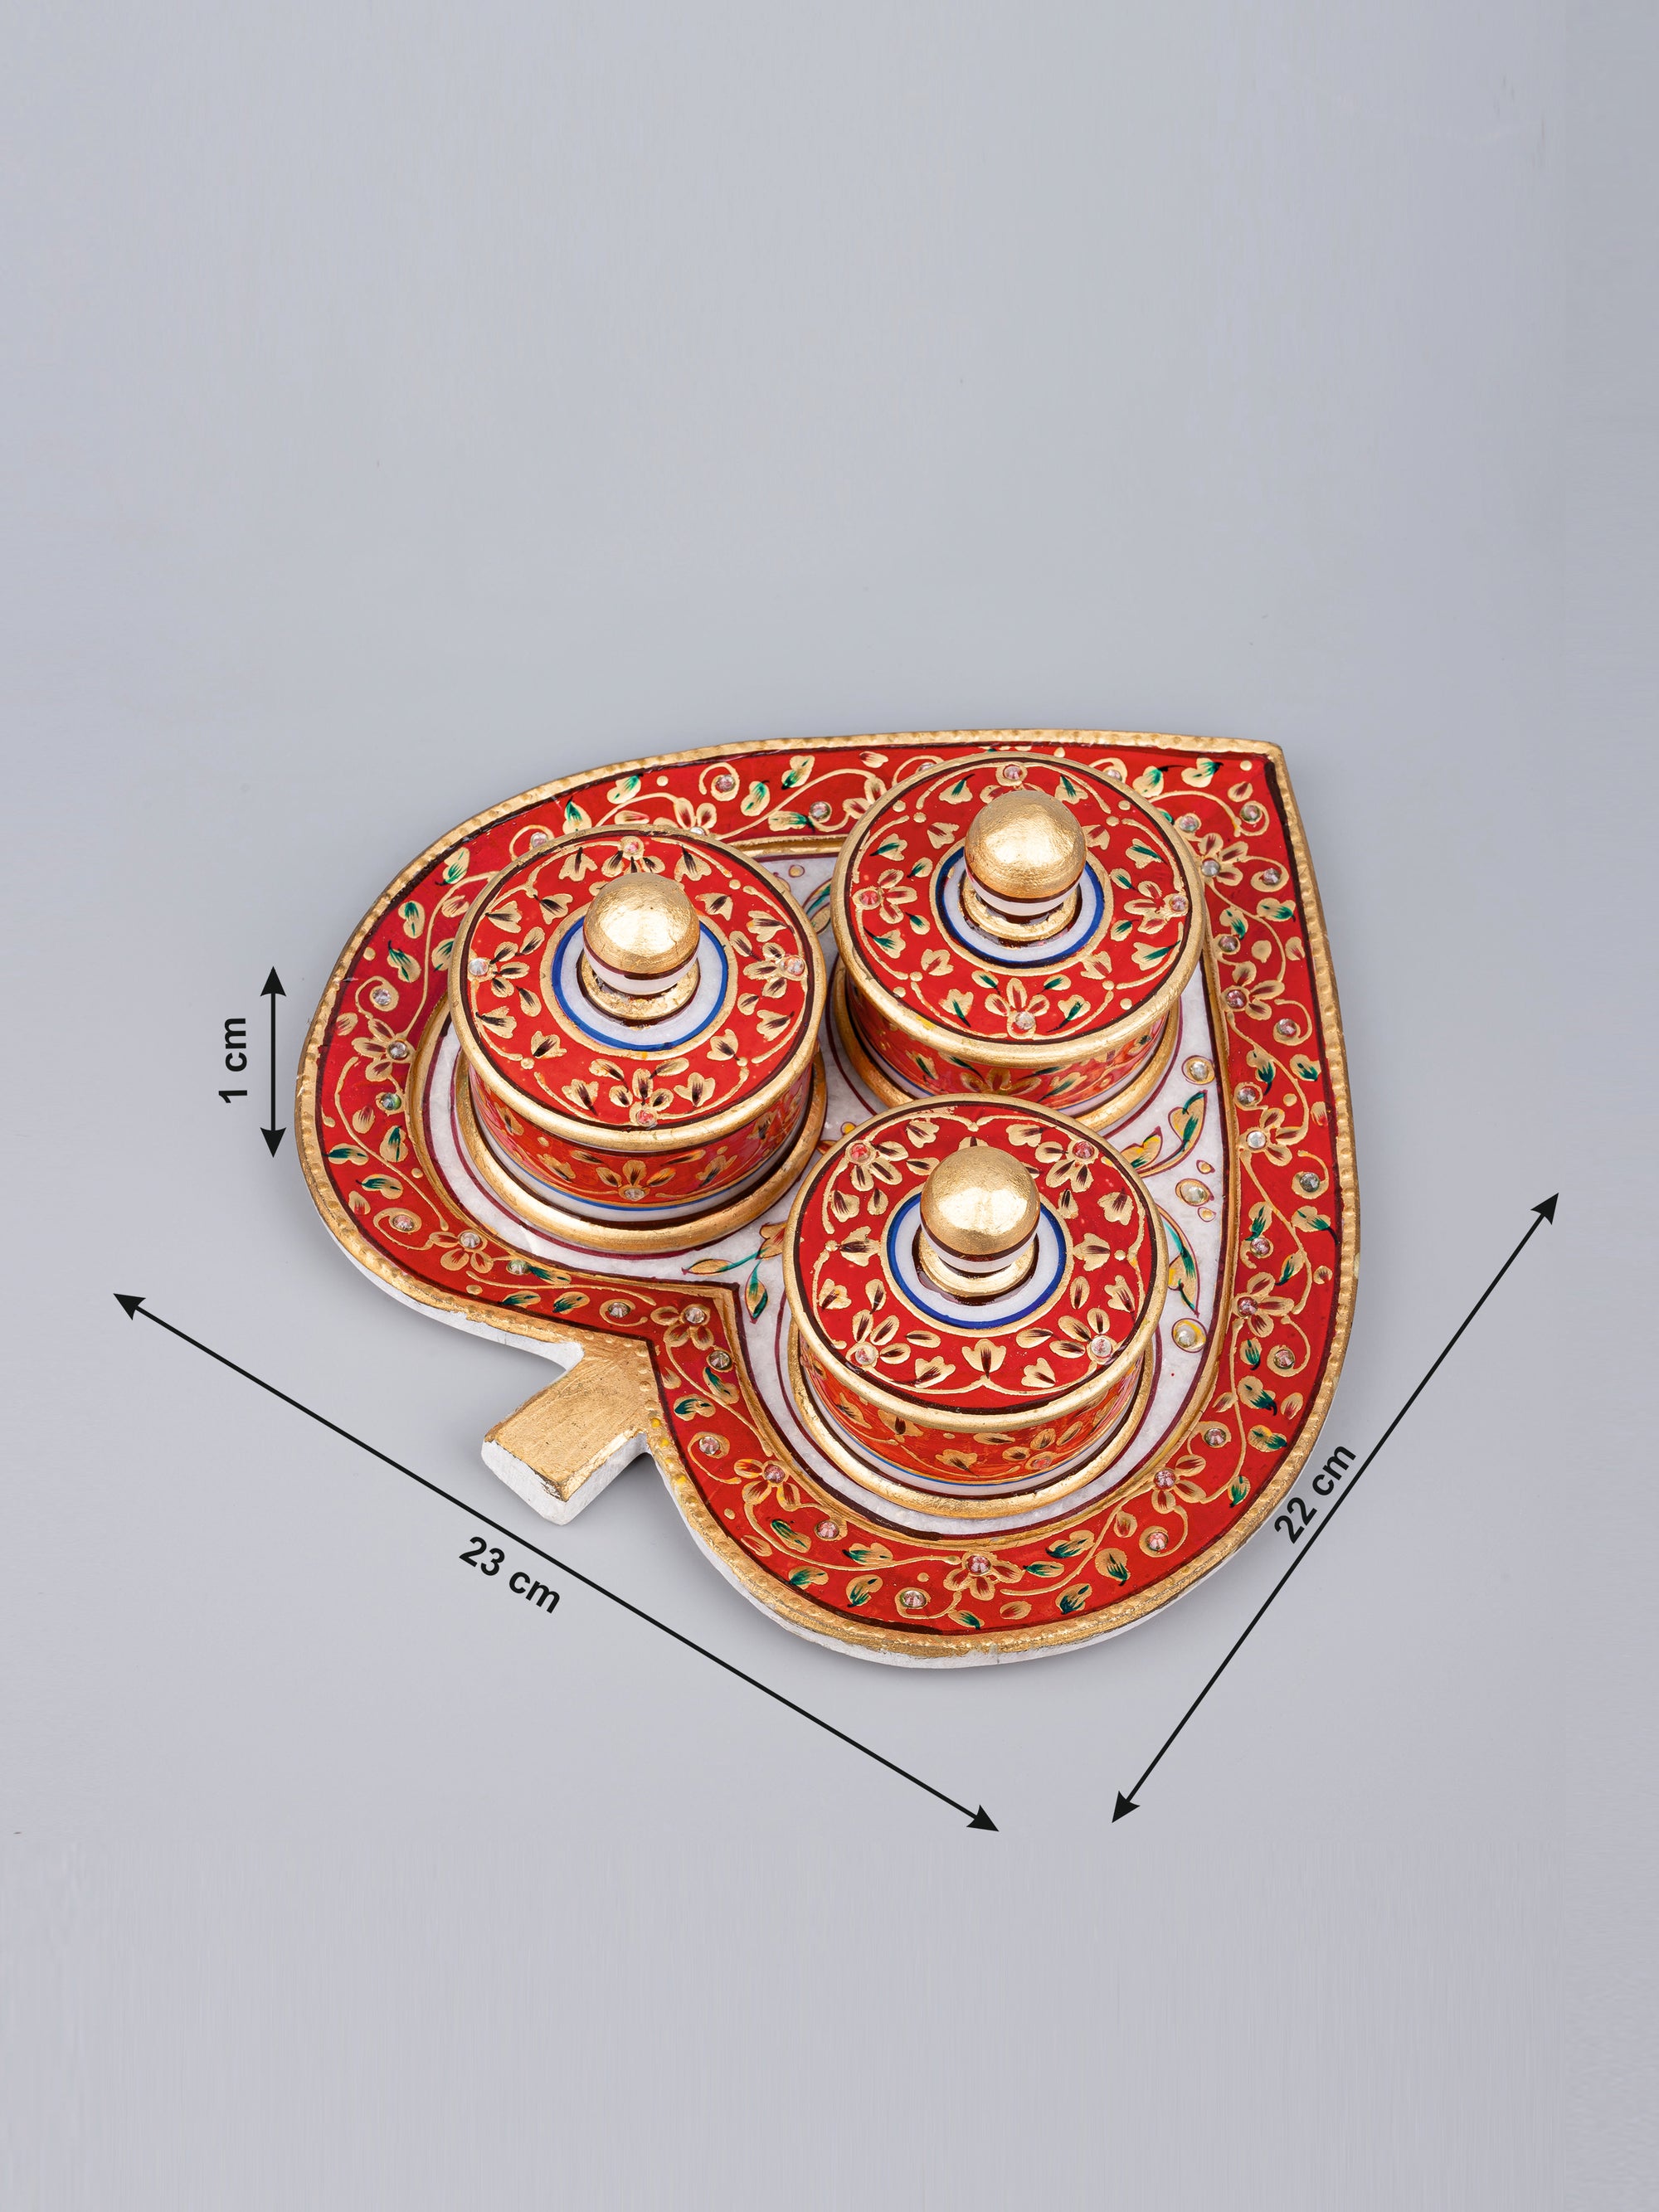 Marble serving set with decorative meenakari work - The Heritage Artifacts